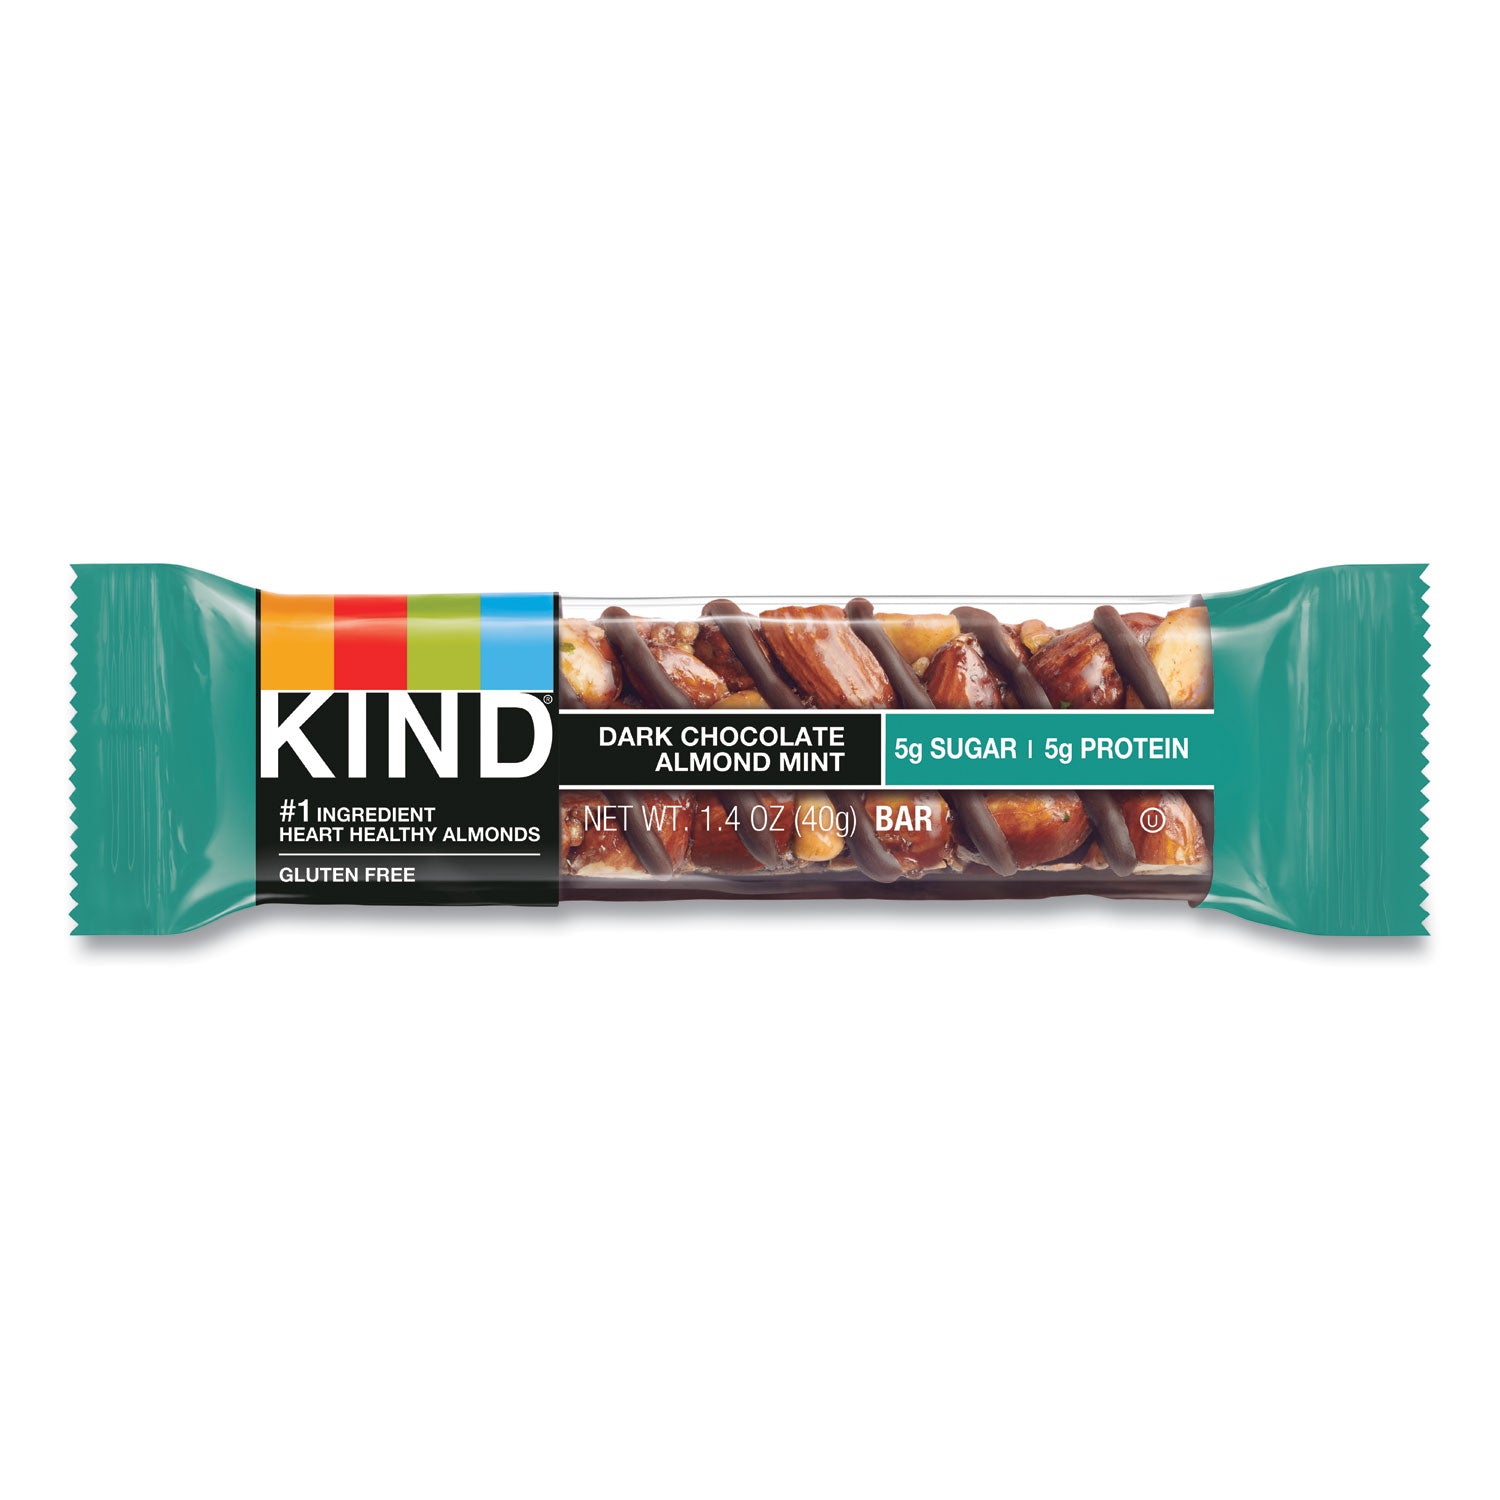 nuts-and-spices-bar-dark-chocolate-almond-mint-14-oz-bar-12-box_knd19988 - 2